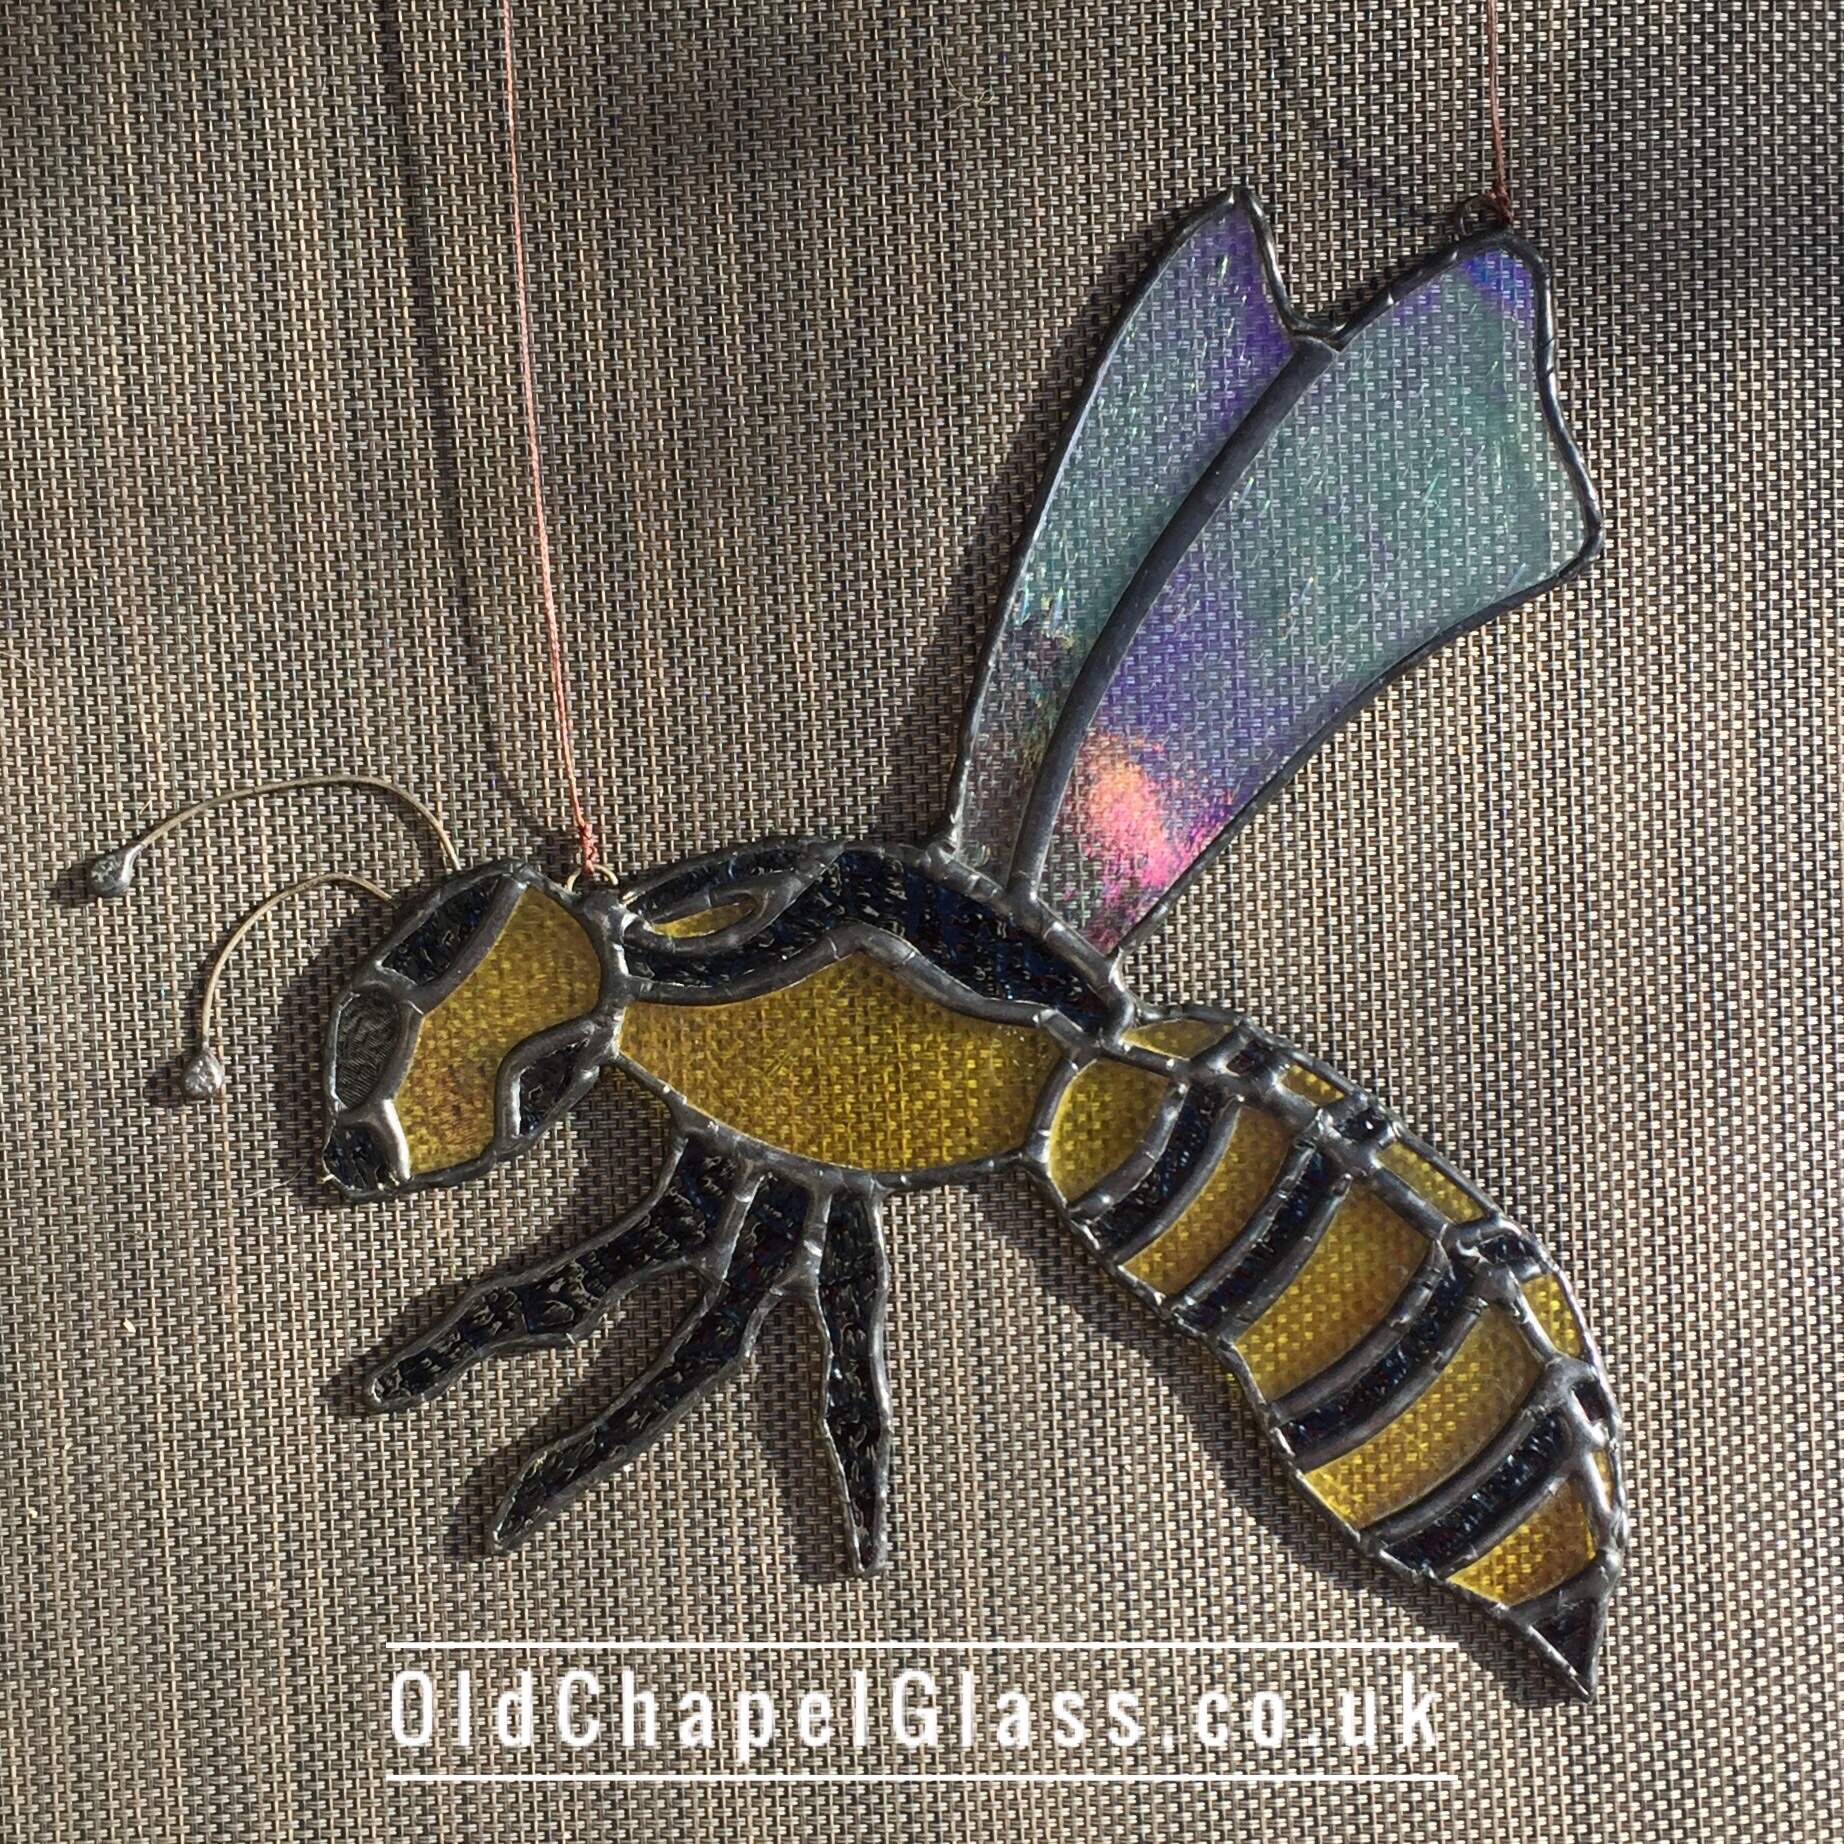 Made for a commission as a Wasps rugby team logo.